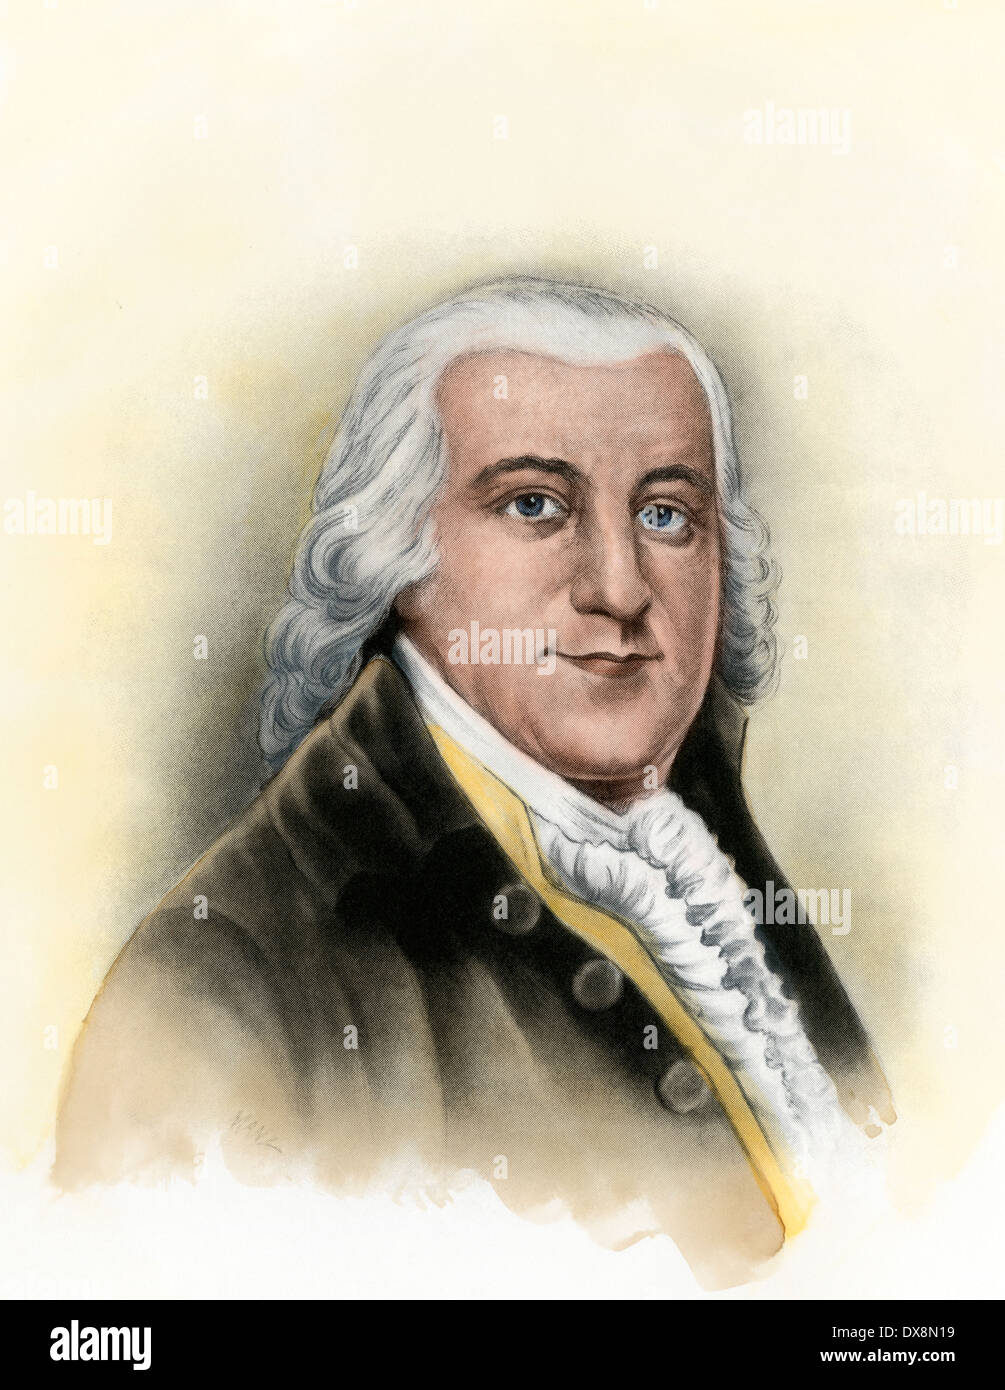 Edward Rutledge, Signer of the Declaration of Independence. Hand-colored halftone of an illustration Stock Photo